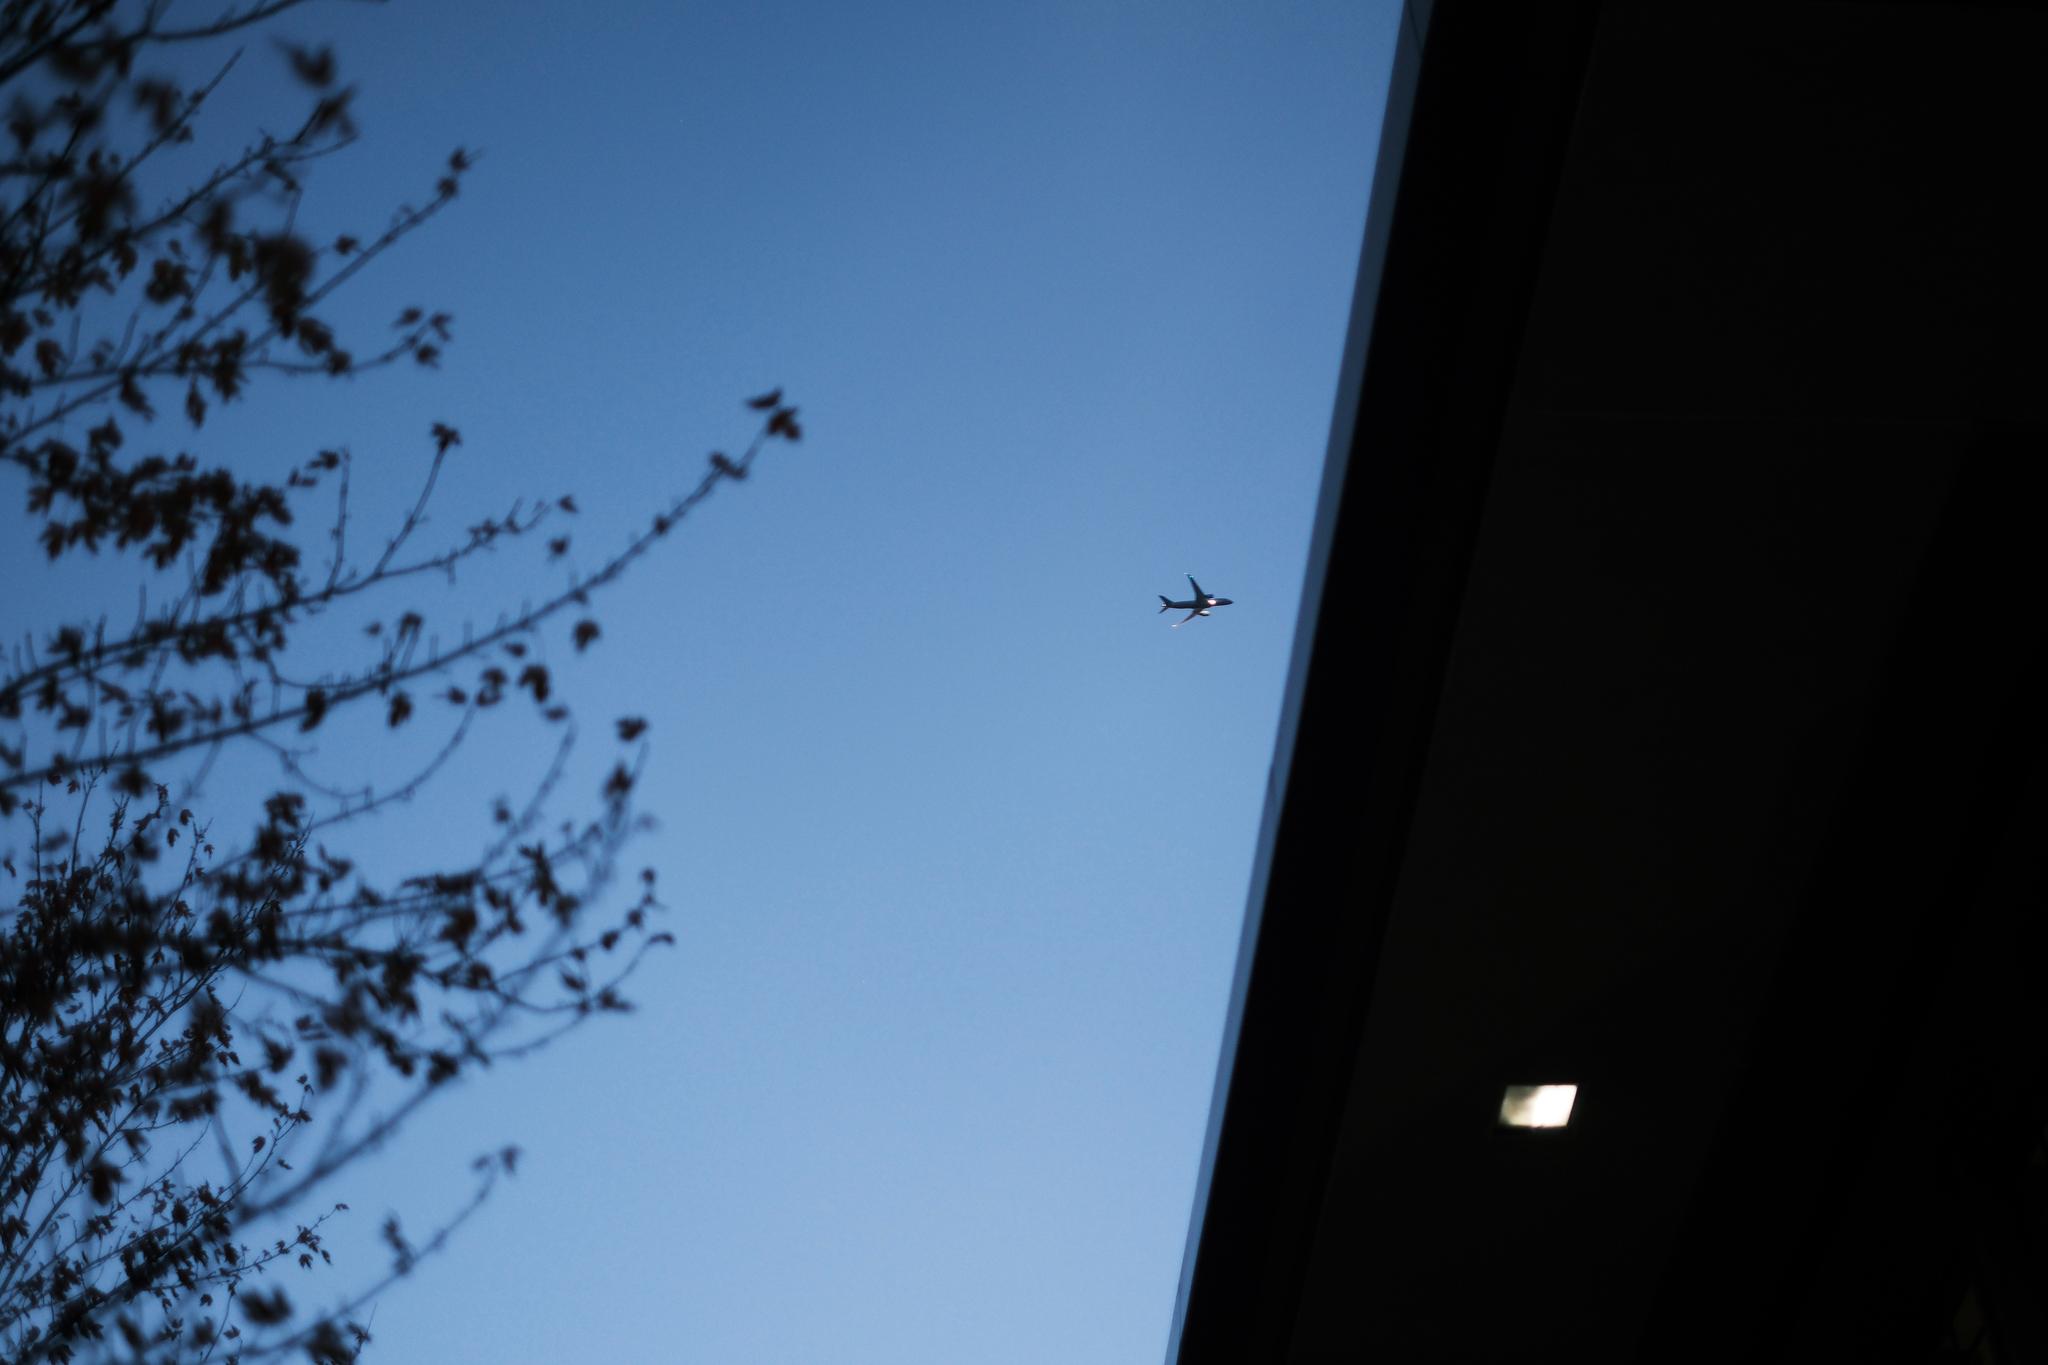 A small airplane flying in a clear blue sky, with tree branches on the left and a building edge on the right